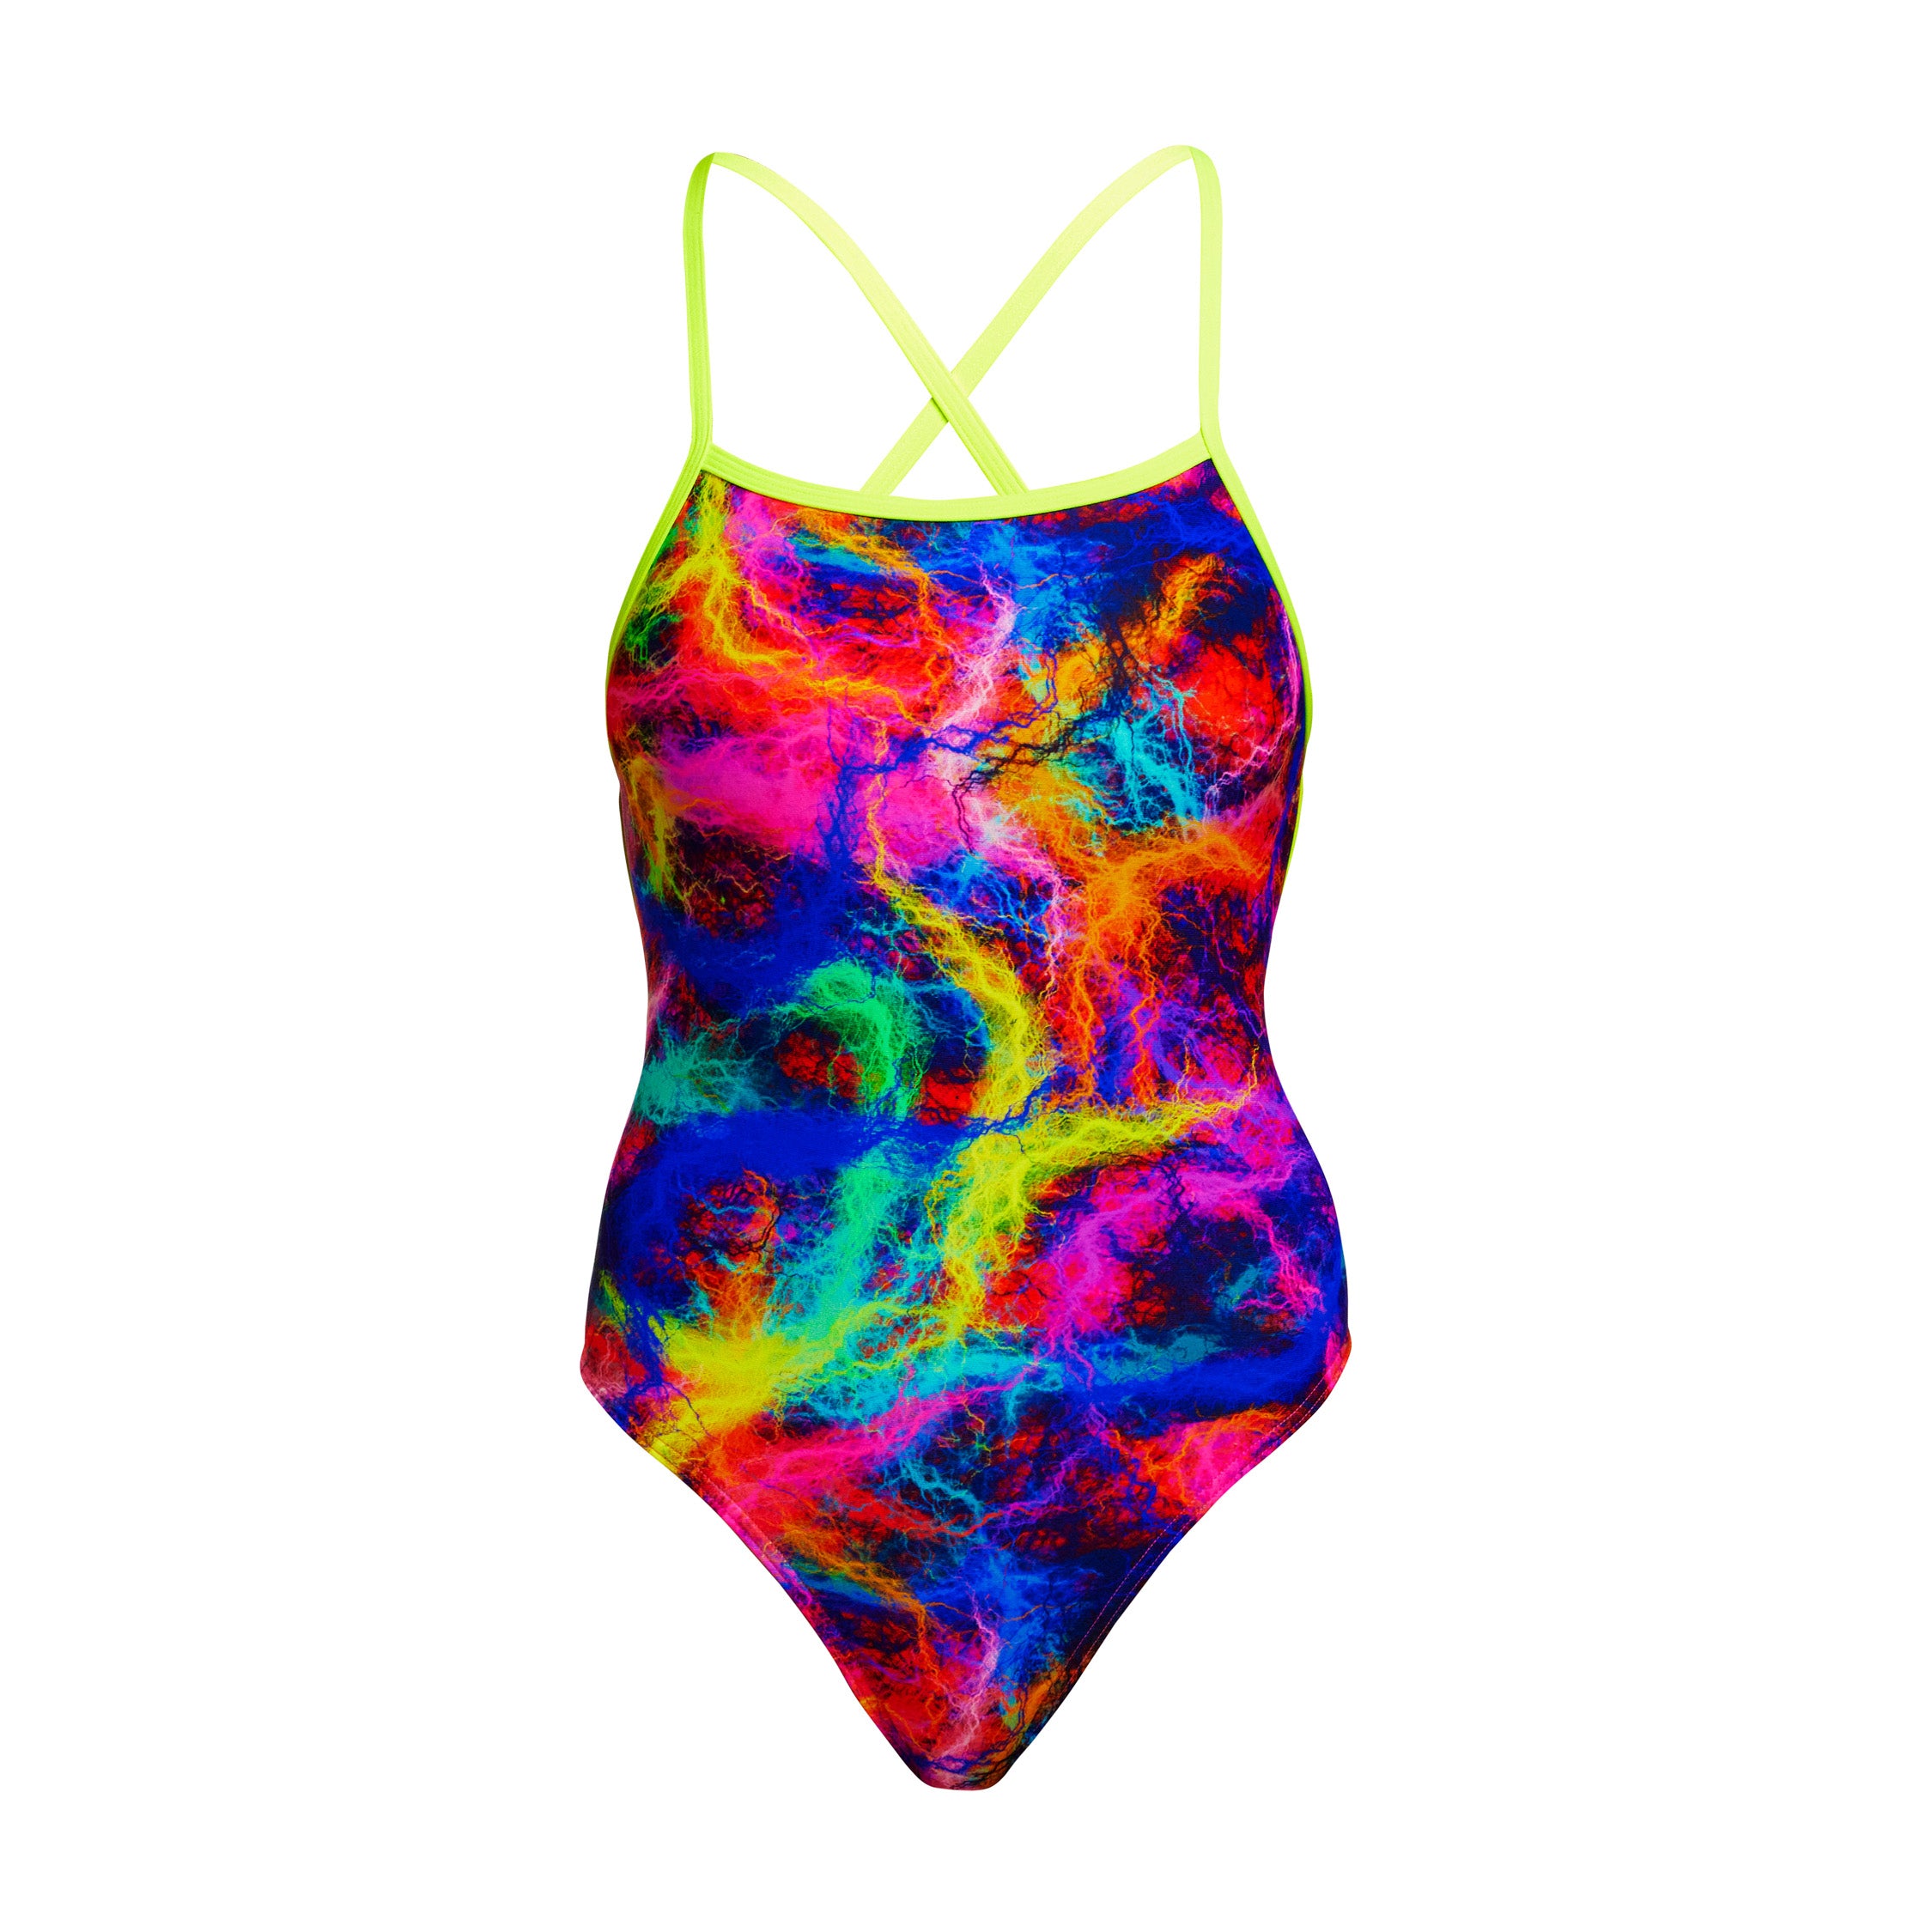 Way Funky Mother Funky Funkita Ladies Single Strapped In One Piece Solar Flares Swimsuit Womens